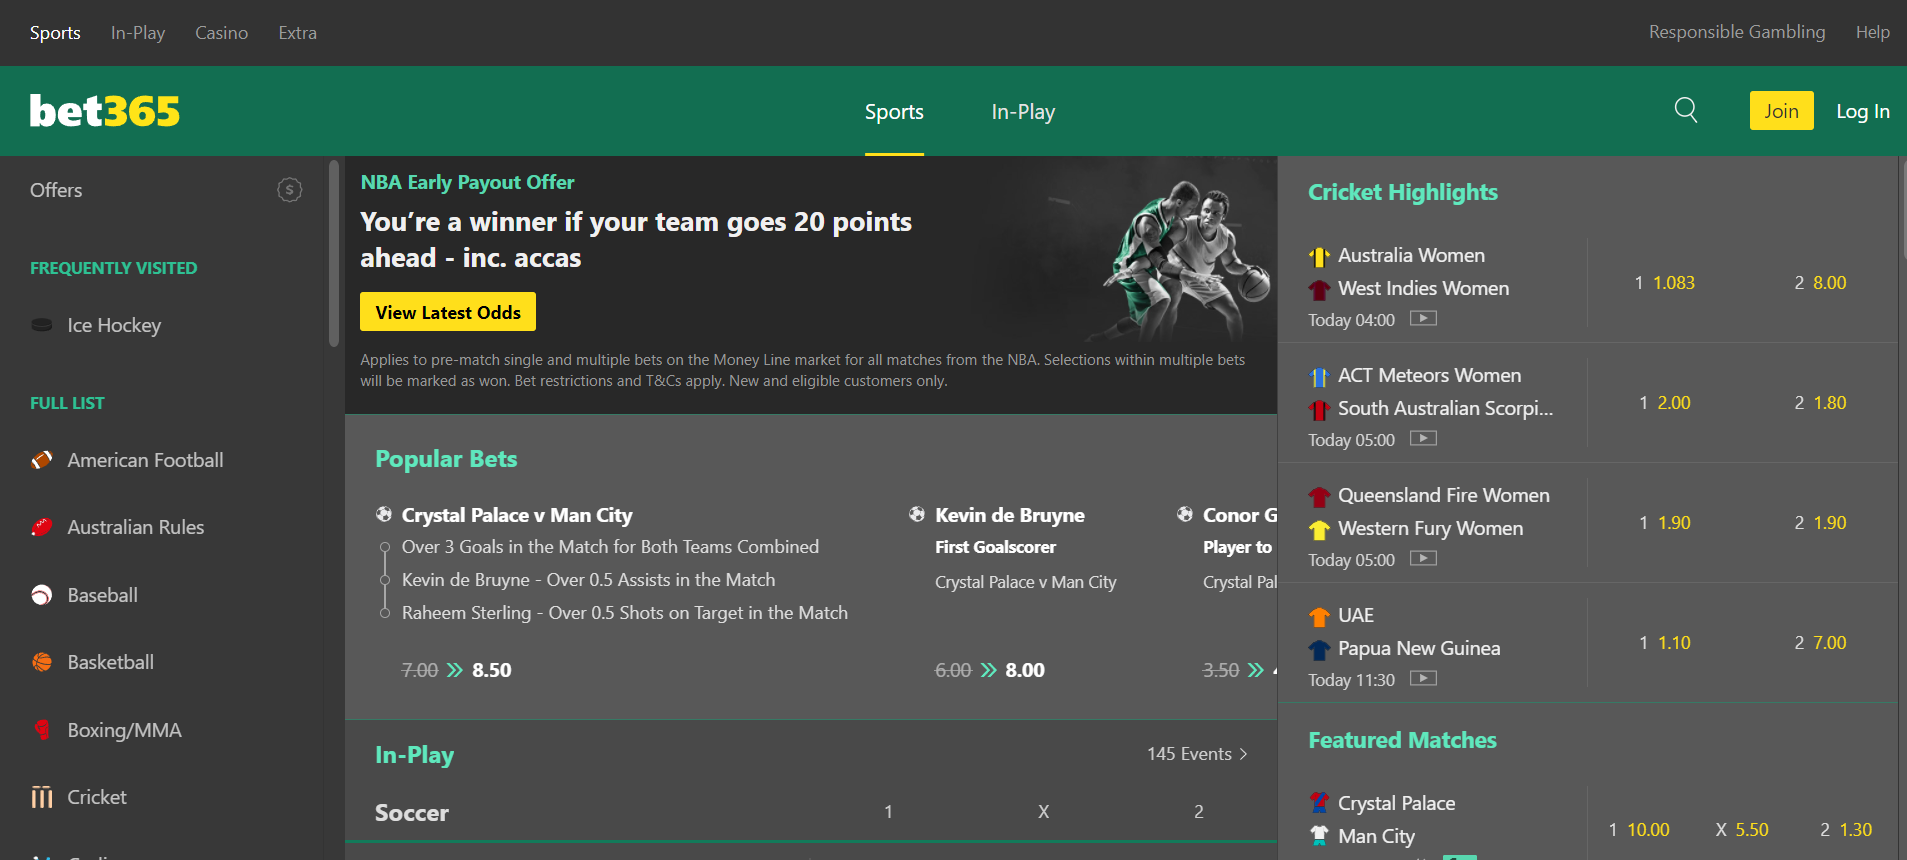 Homepage of Bet365 betting website for sports offering live as well pre-match betting to all its customers.